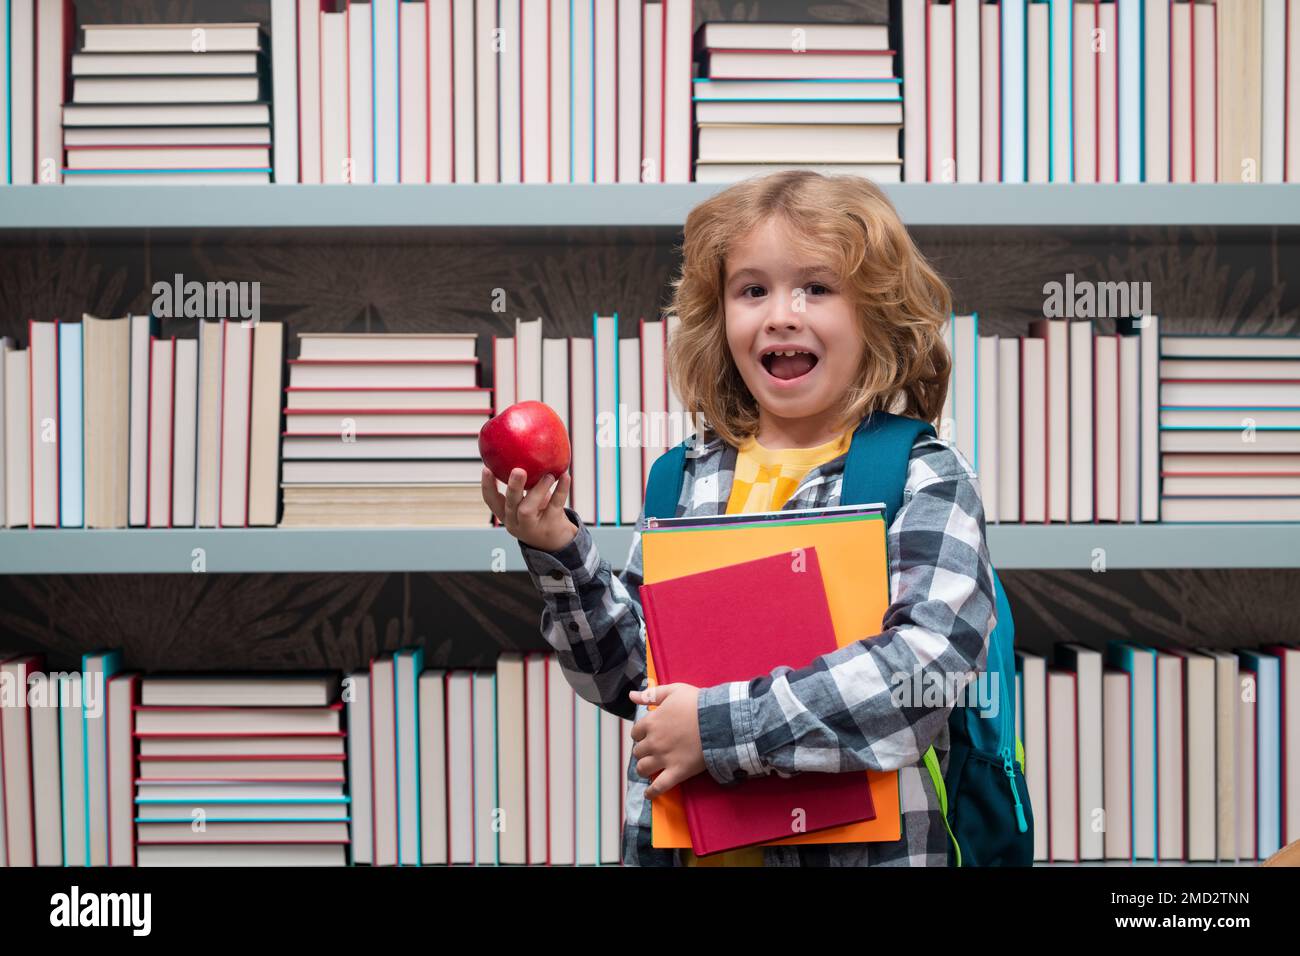 School boy with books and apple in library. School child 7-8 years old with book go back to school. Little student. Stock Photo